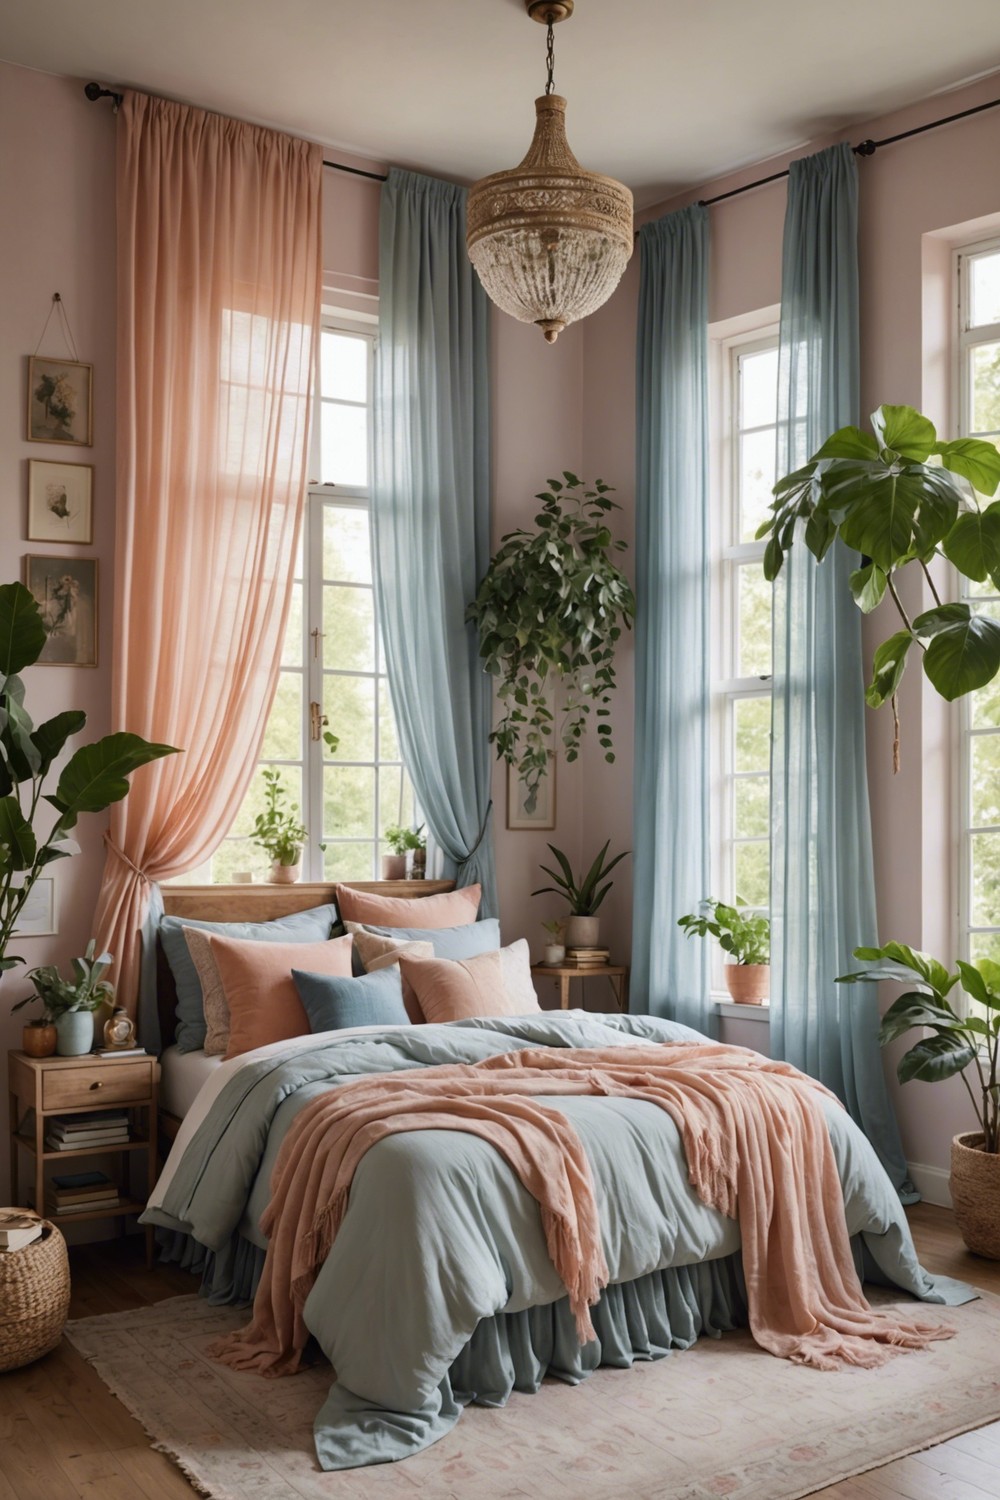 Layered Sheer Curtains in Pastel Shades